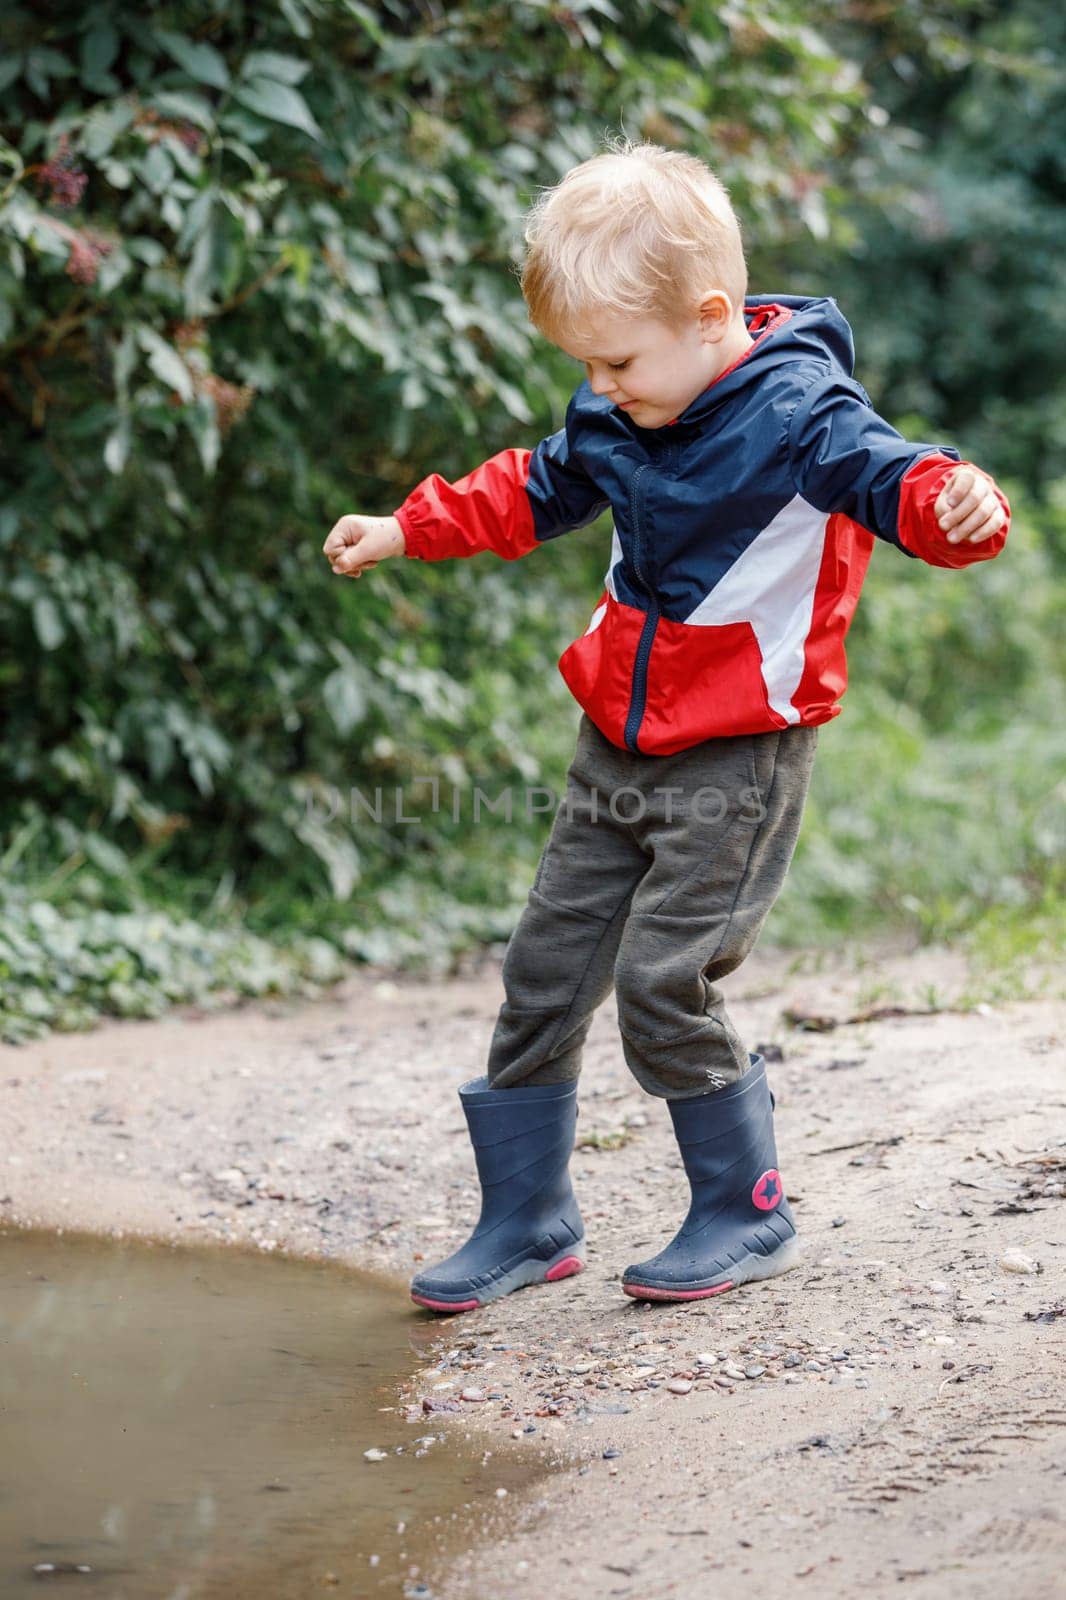 A young blond boy in a blue and red raincoat and rain boots happily go in a puddle of water and mud. by Lincikas